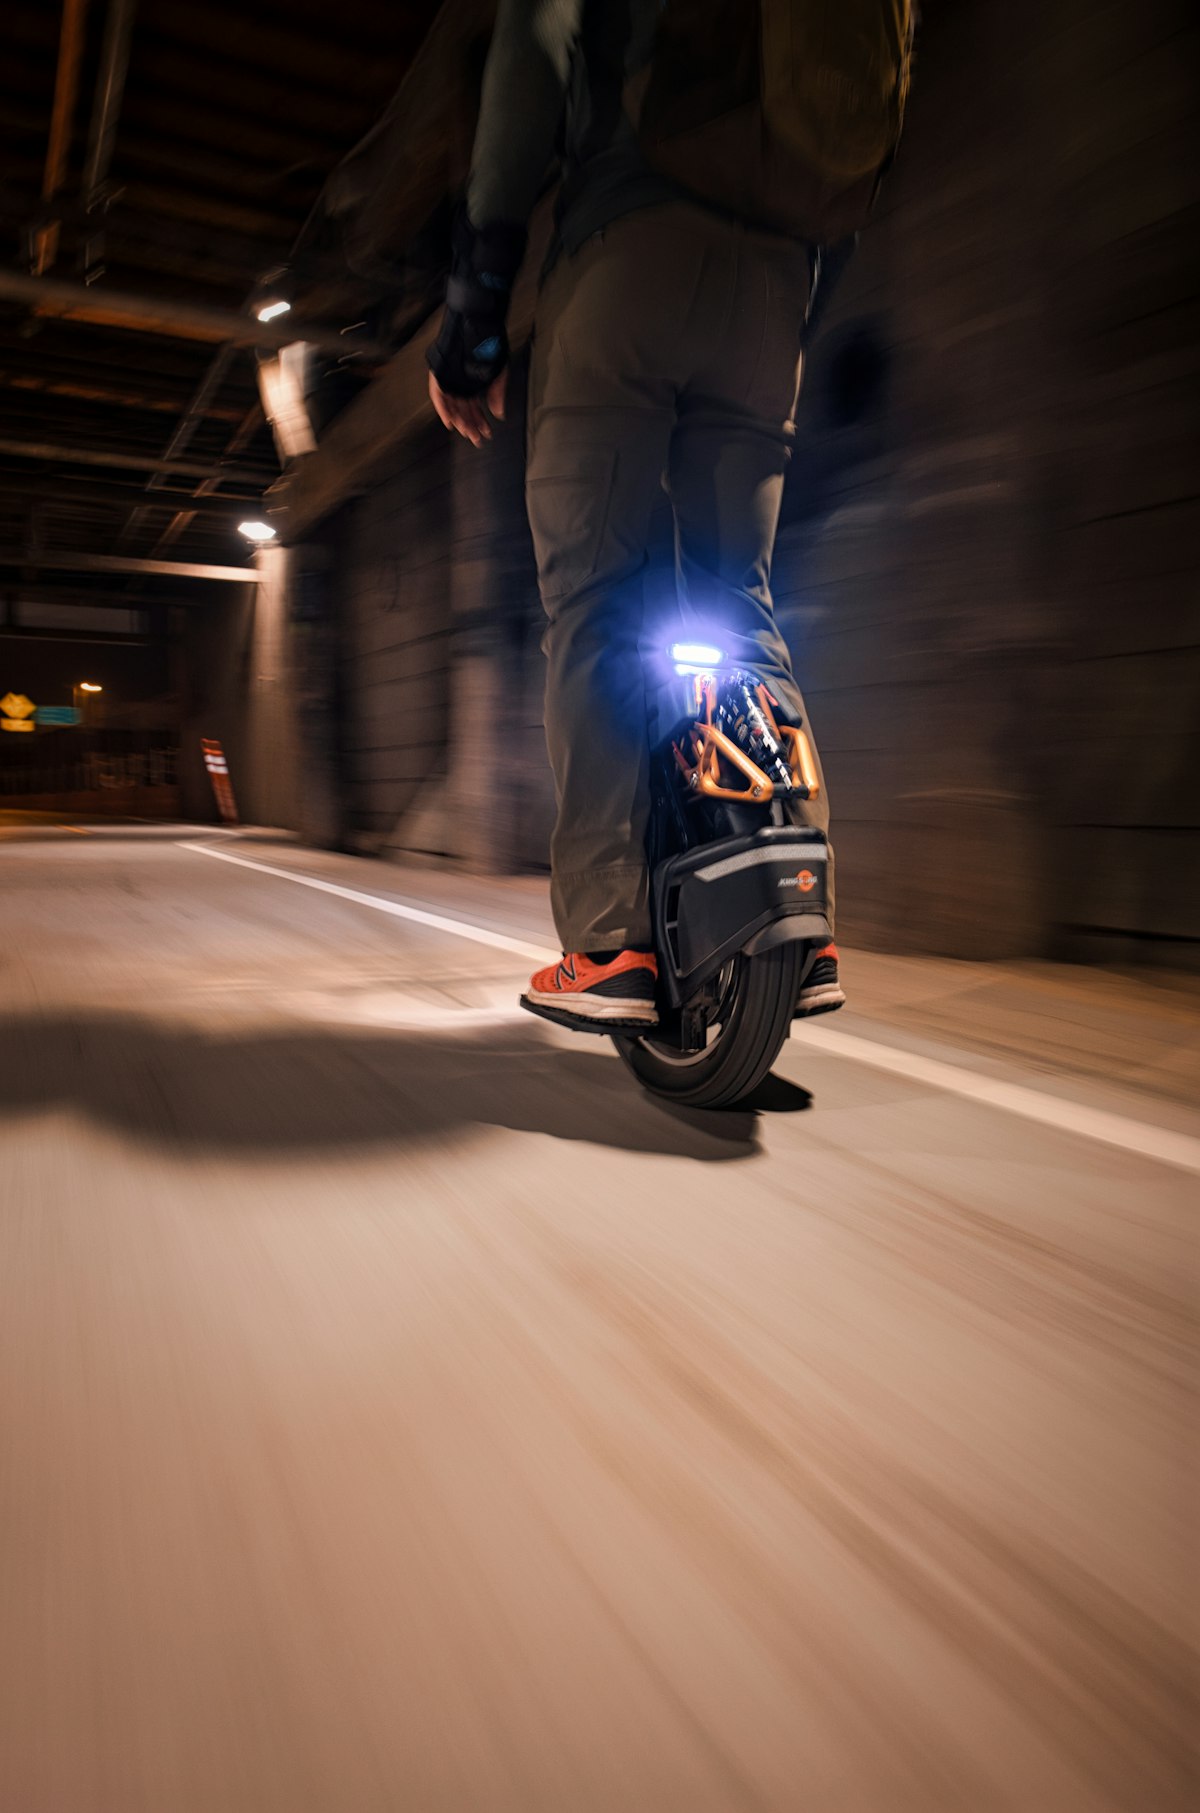 How To Ride an Electric Unicycle